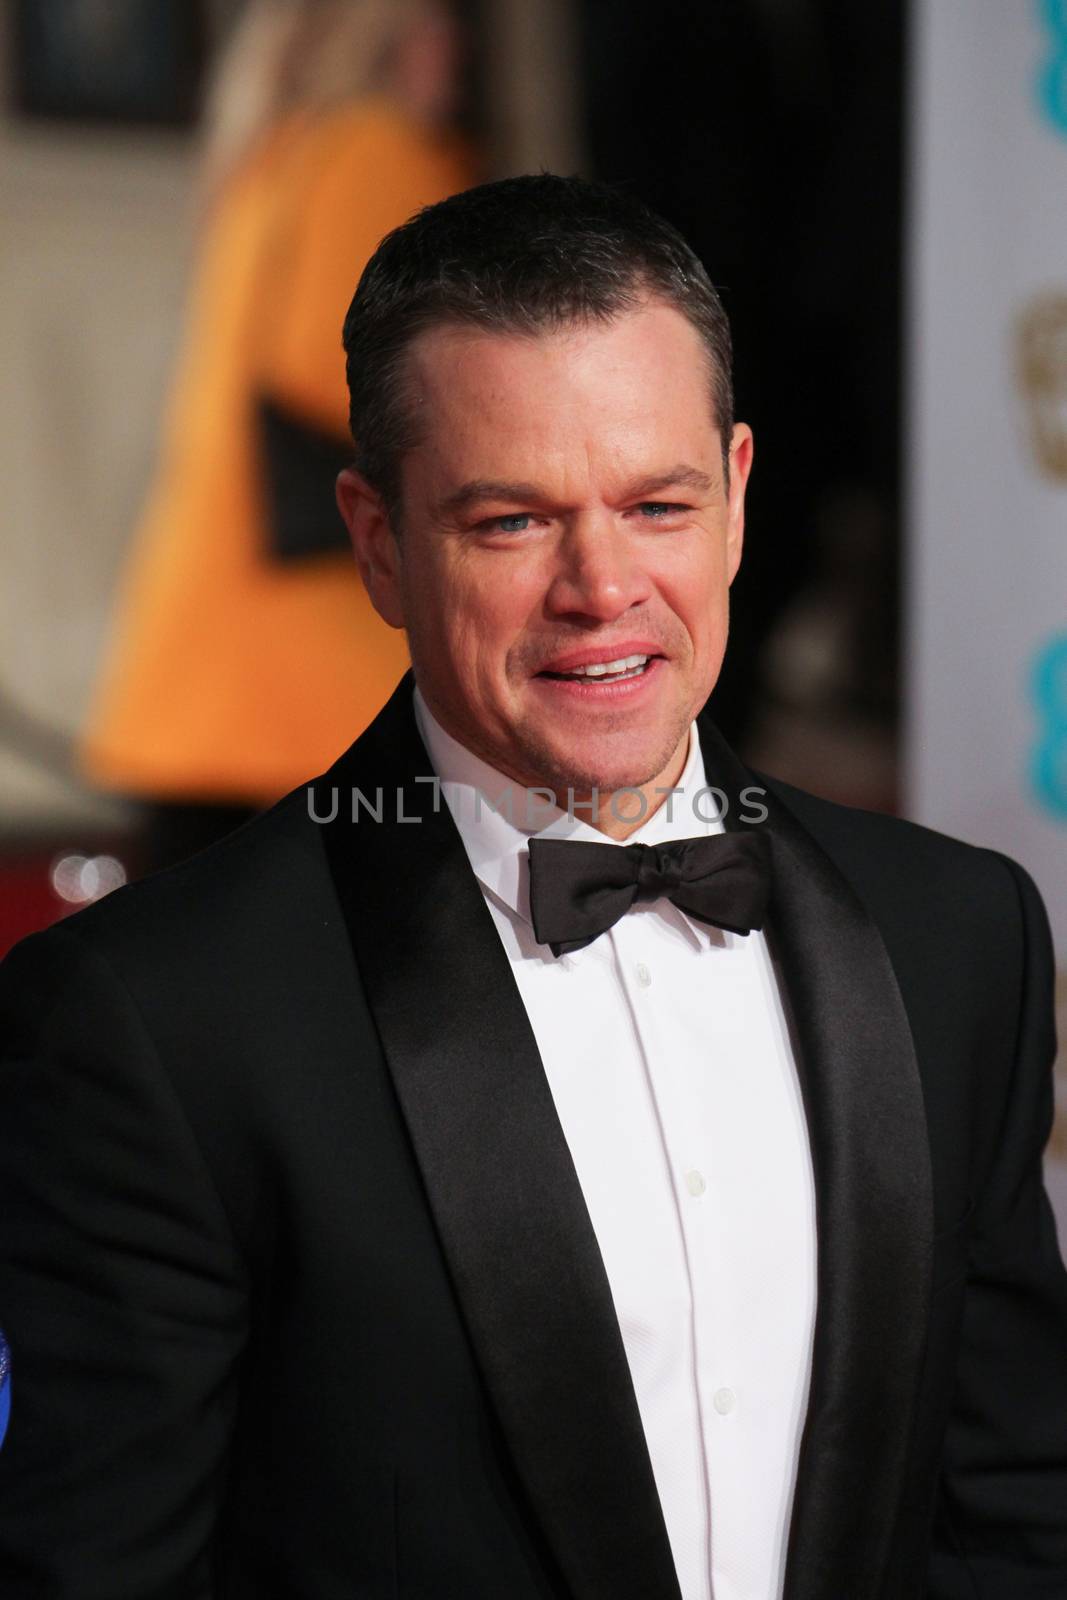 UK, London: American actor Matt Damon poses on the red Carpet at the EE British Academy Film Awards, BAFTA Awards, at the Royal Opera House in London, England, on 14 February 2016. 